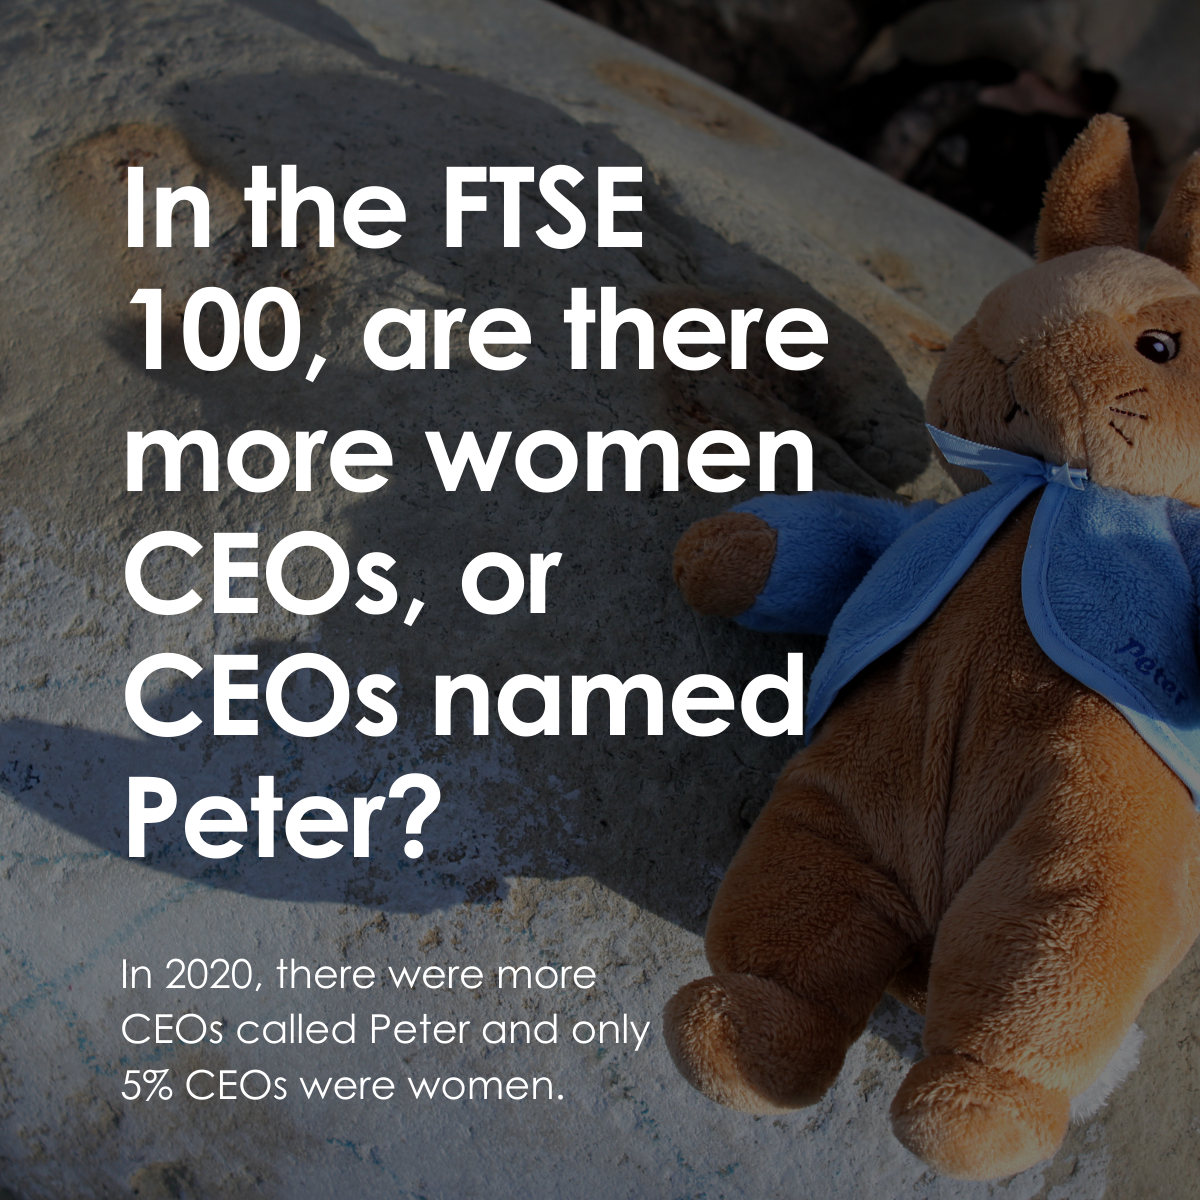 Image reading "In the FTSE 100, are there more women CEOs, or CEOs named Peter? In 2020, there were more CEOs called Peter and only 5% CEOs were women."